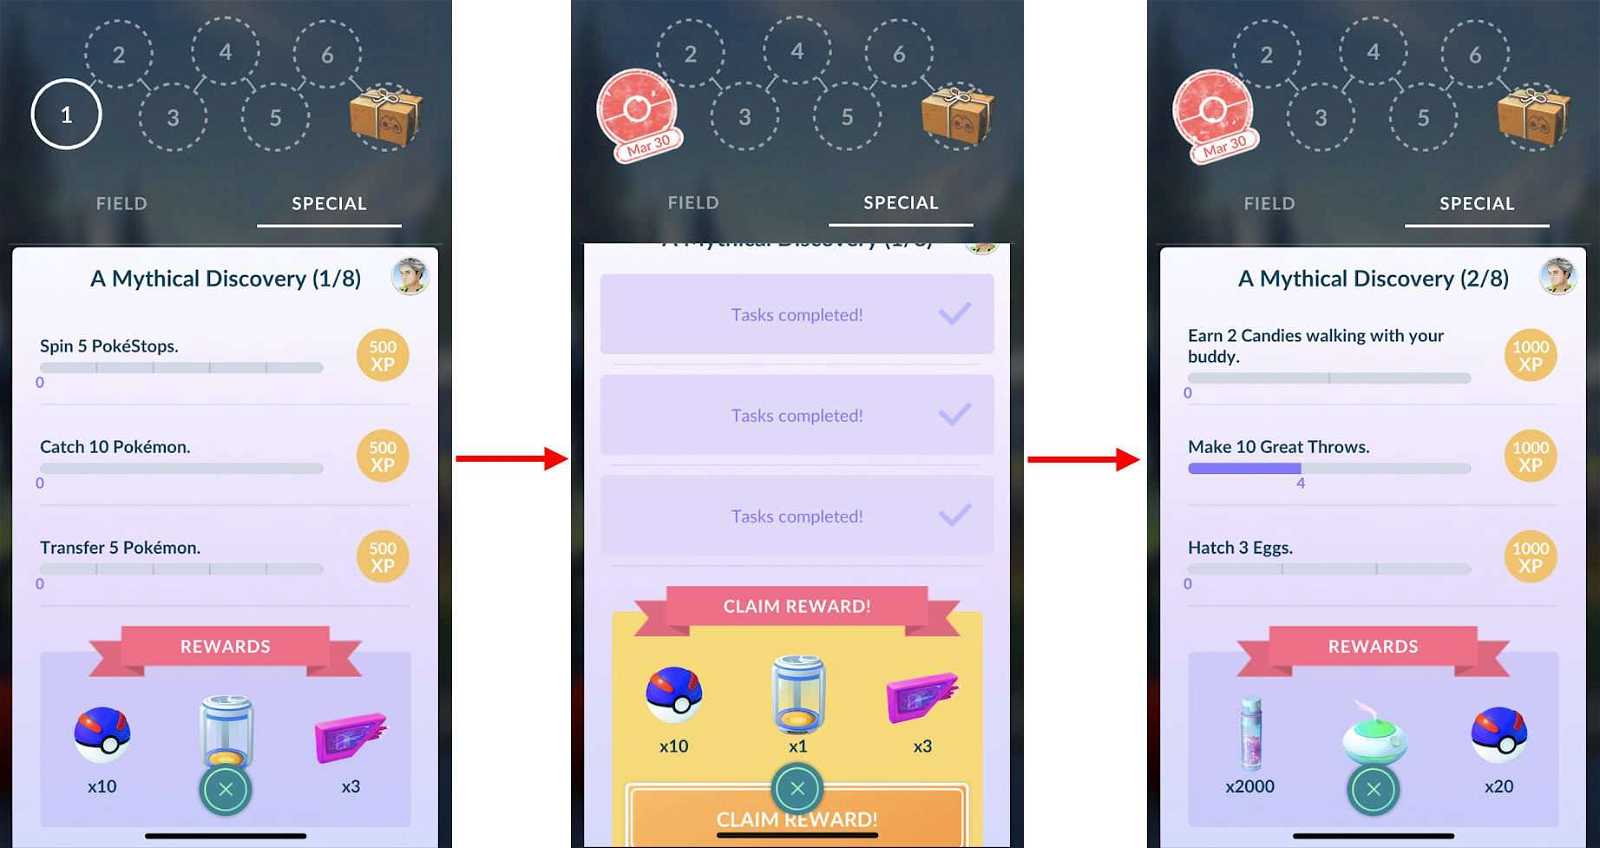 Pokémon Go Research: Your guide to quests, rewards and Mew